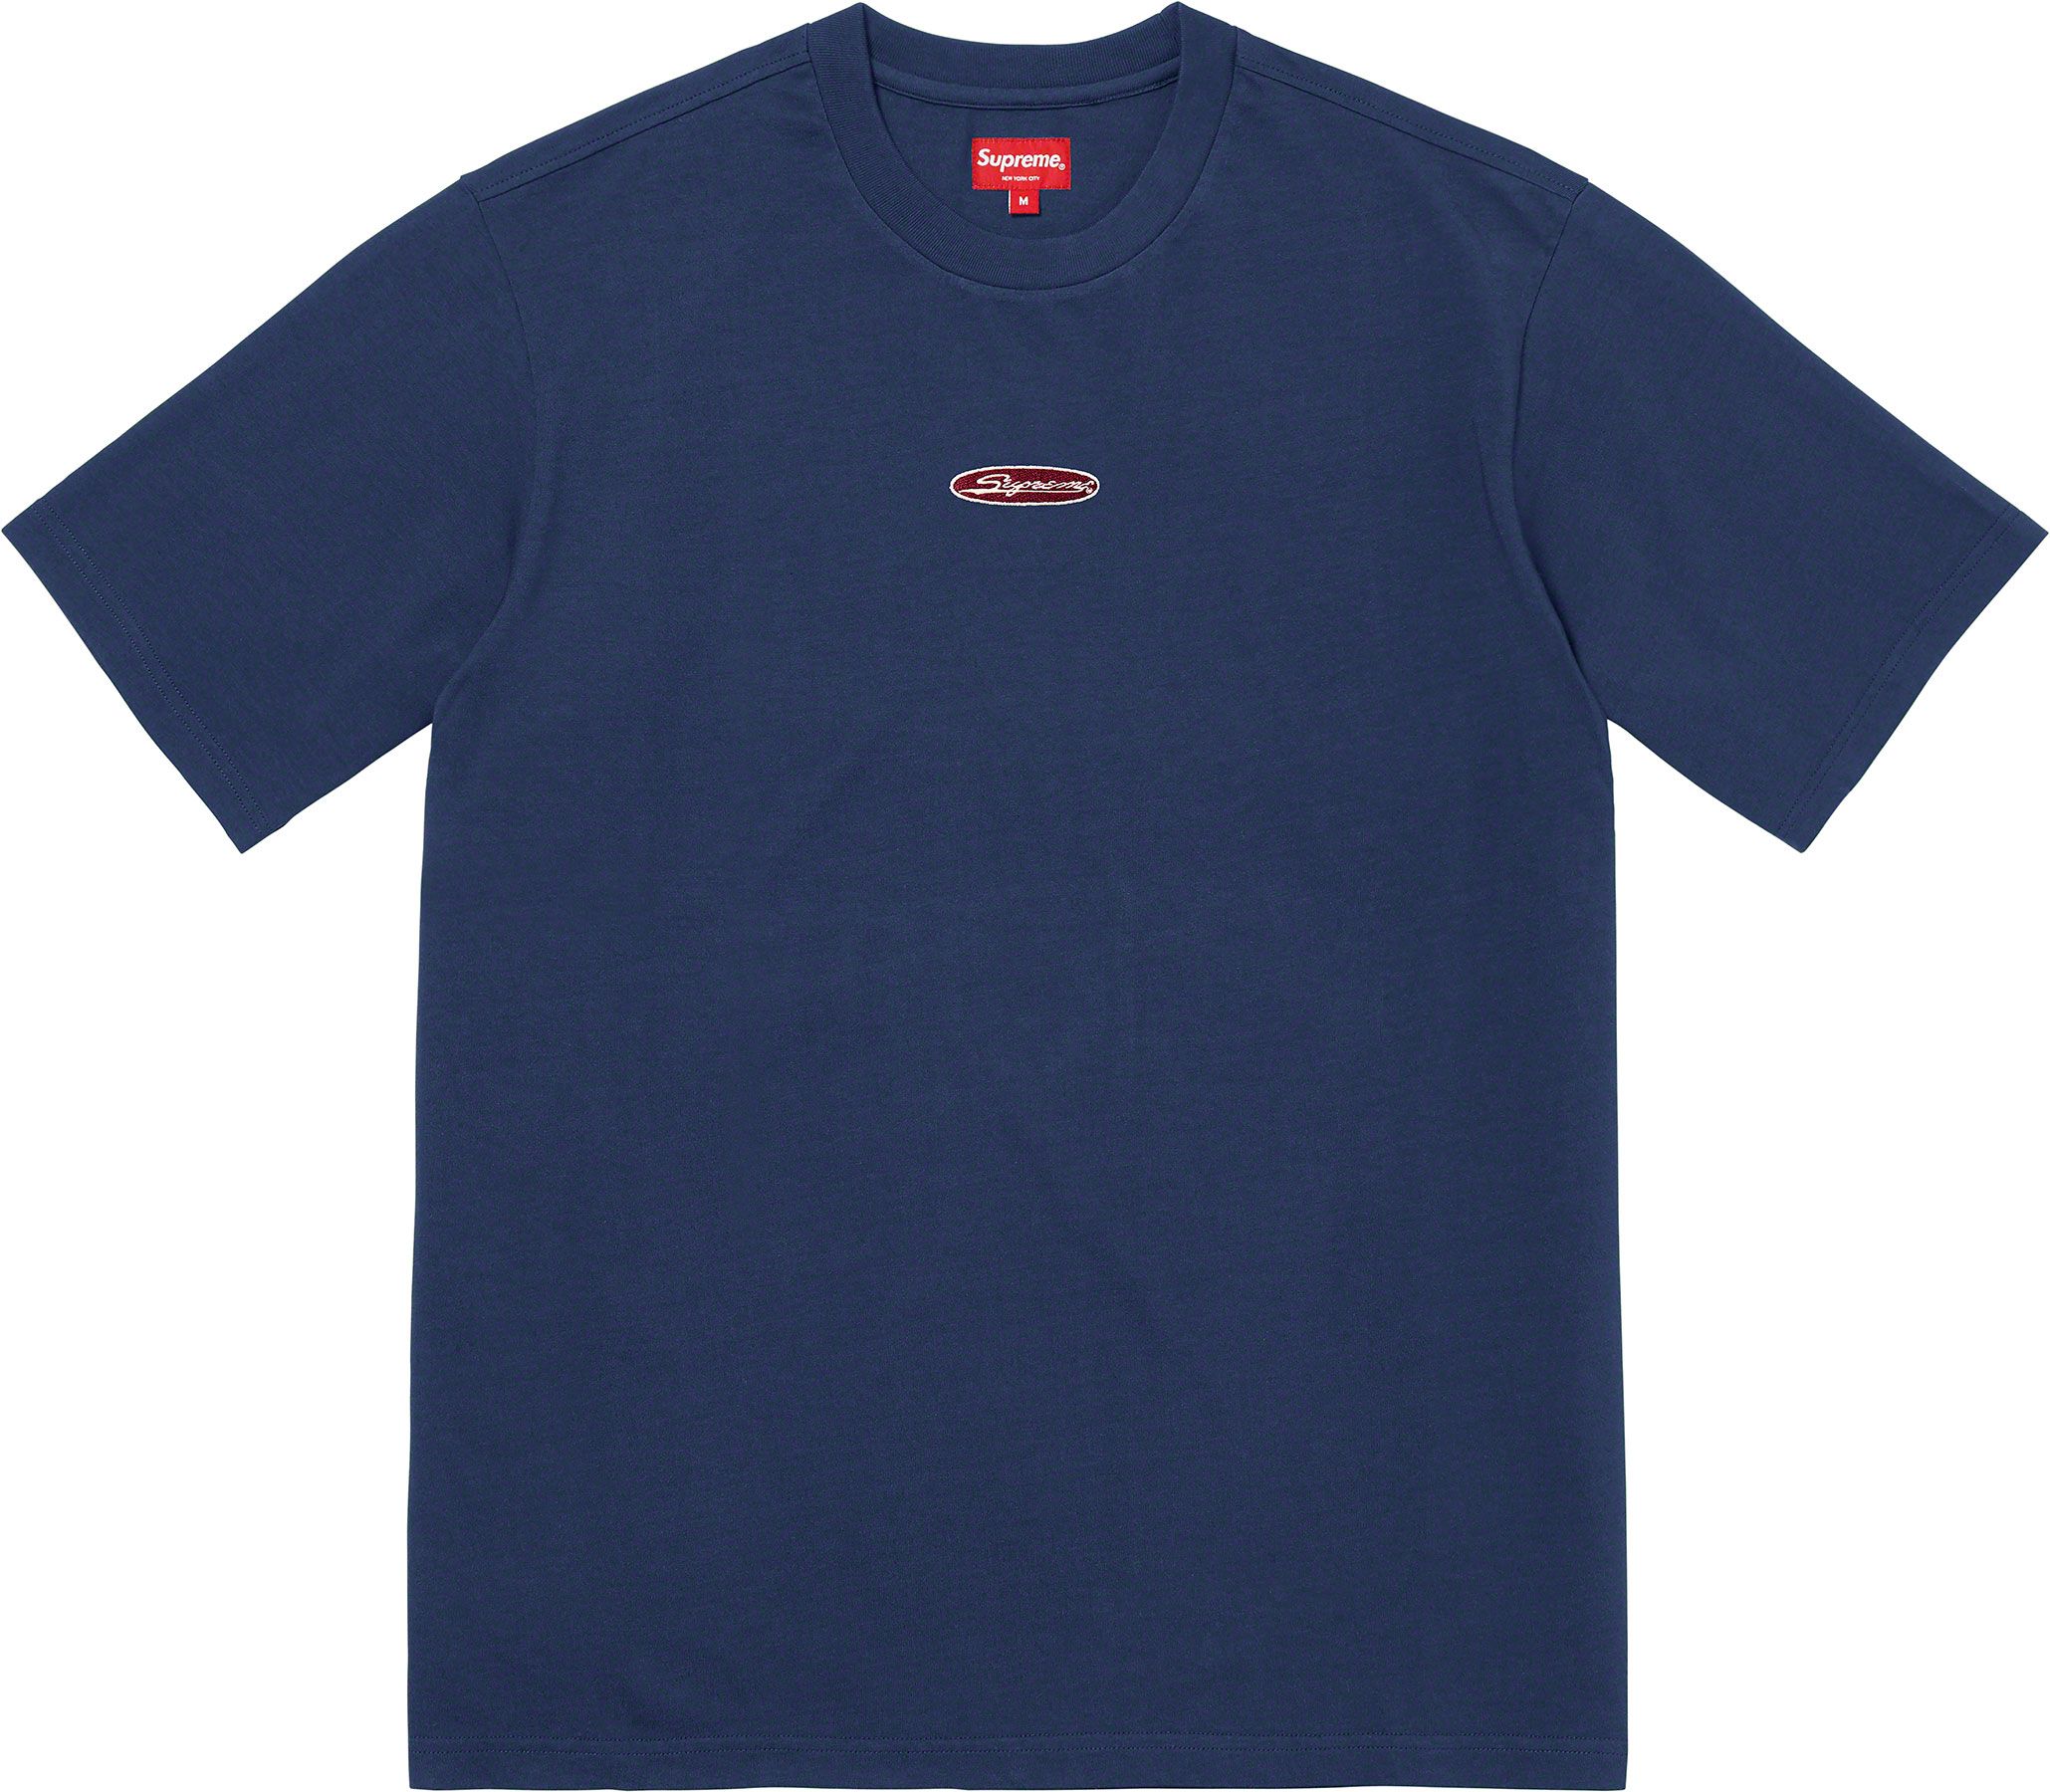 One Two Fuck You S/S Top - Spring/Summer 2023 Preview – Supreme